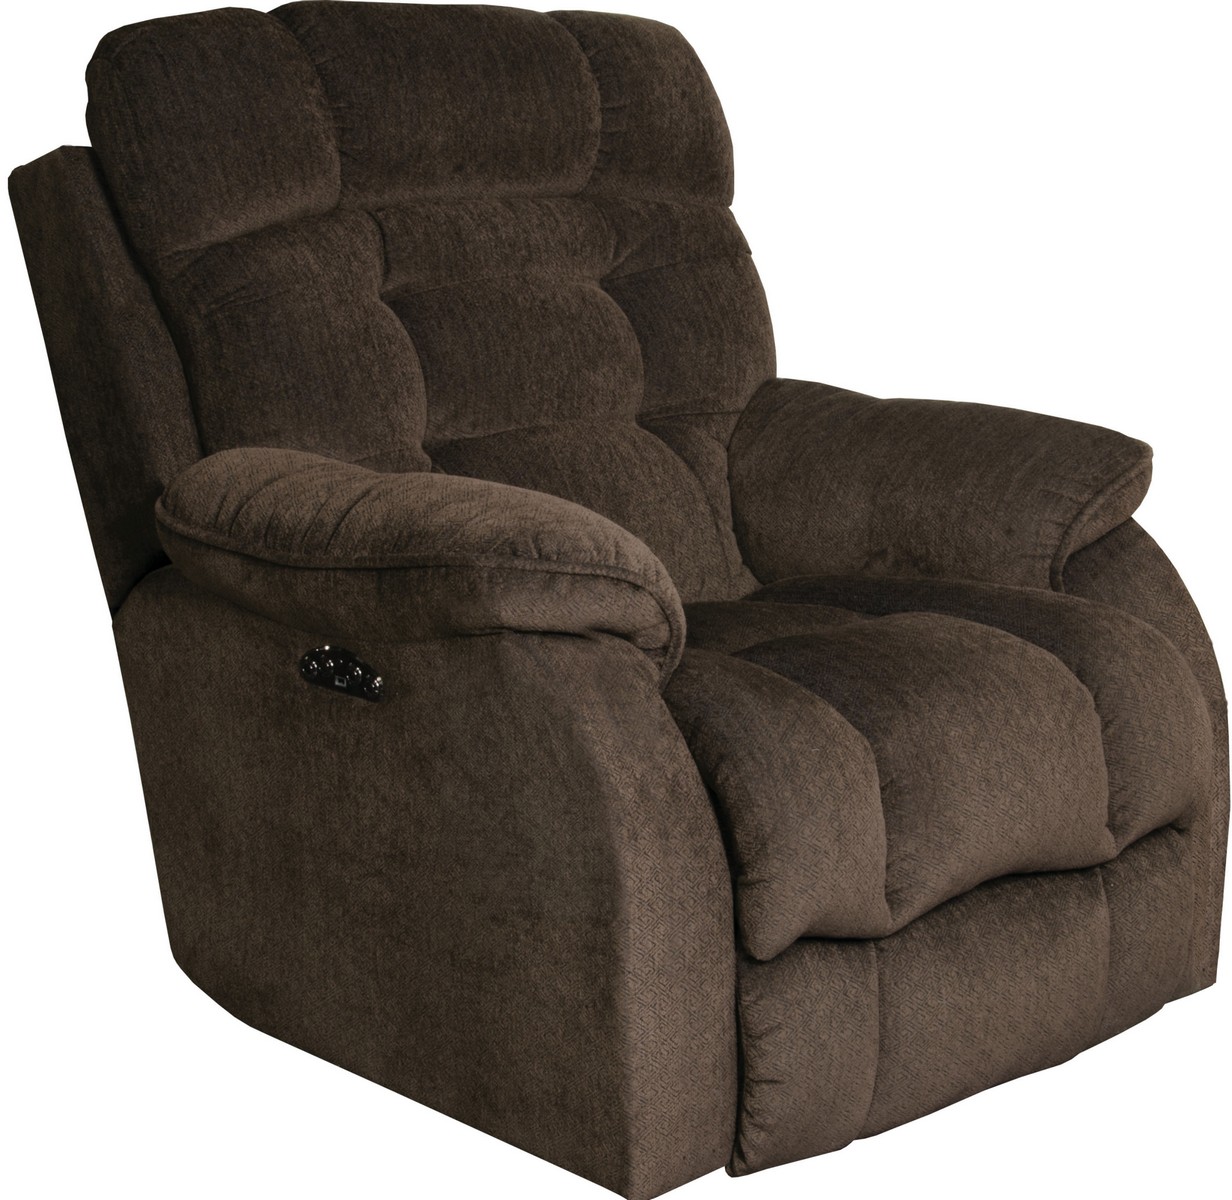 CatNapper Crowley Power Lay Flat Recliner With Power Headrest and Power Lumbar - Espresso